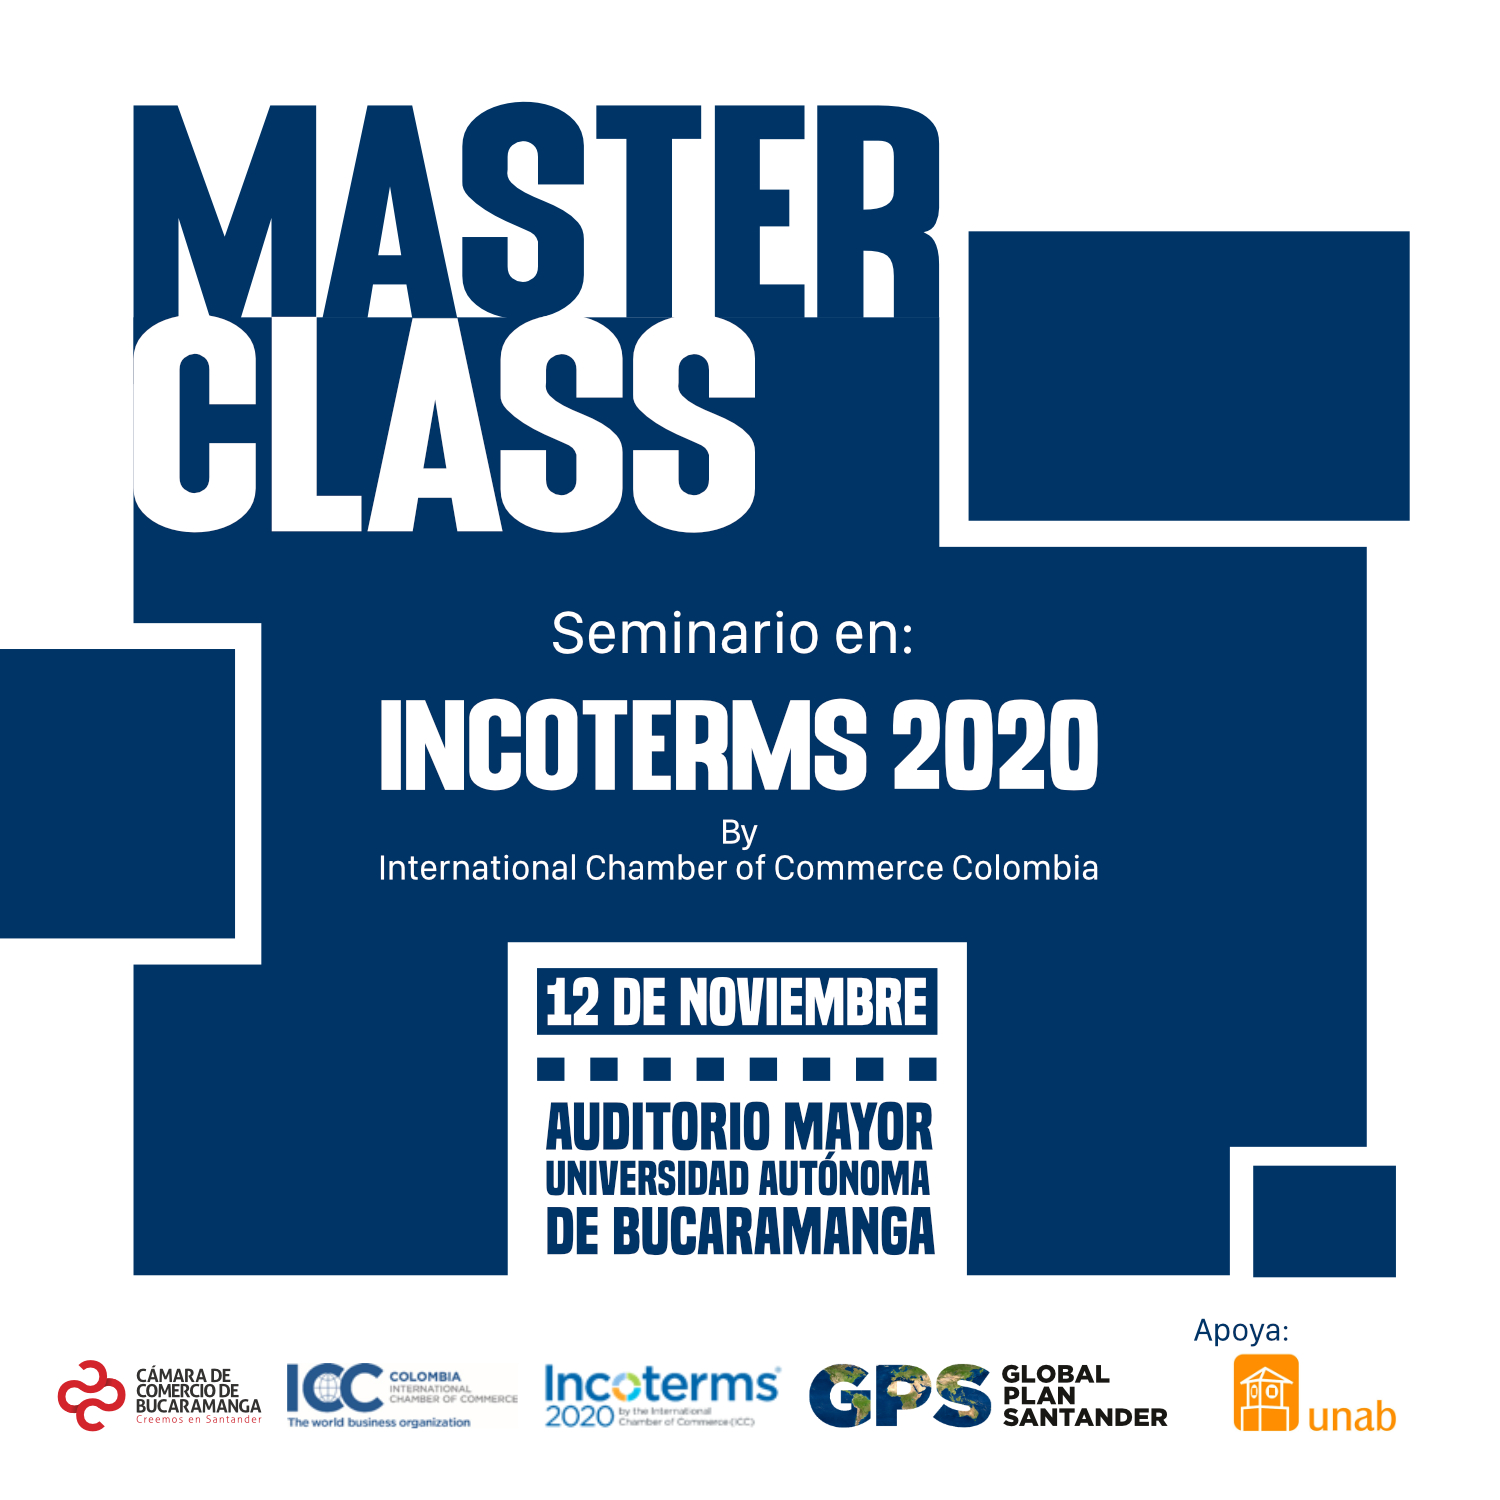 INCOTERMS 2020 